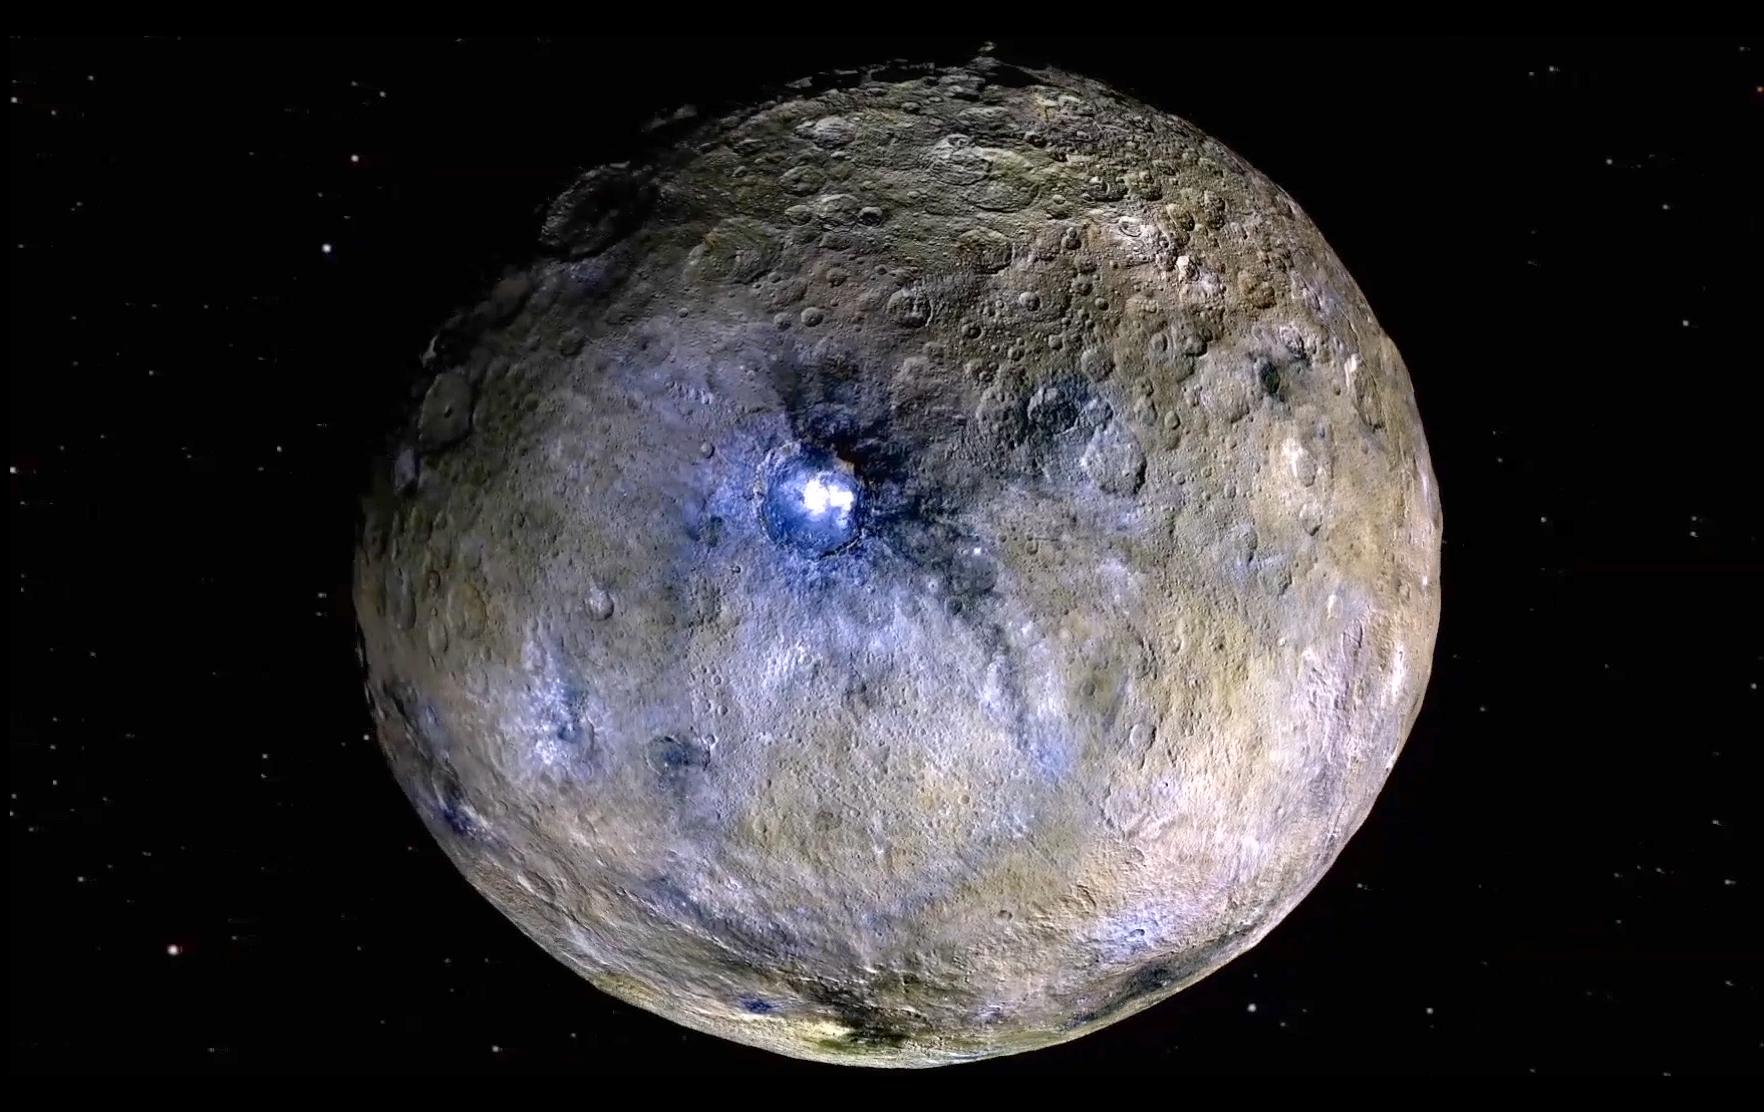 An image of the dwarf planet Ceres